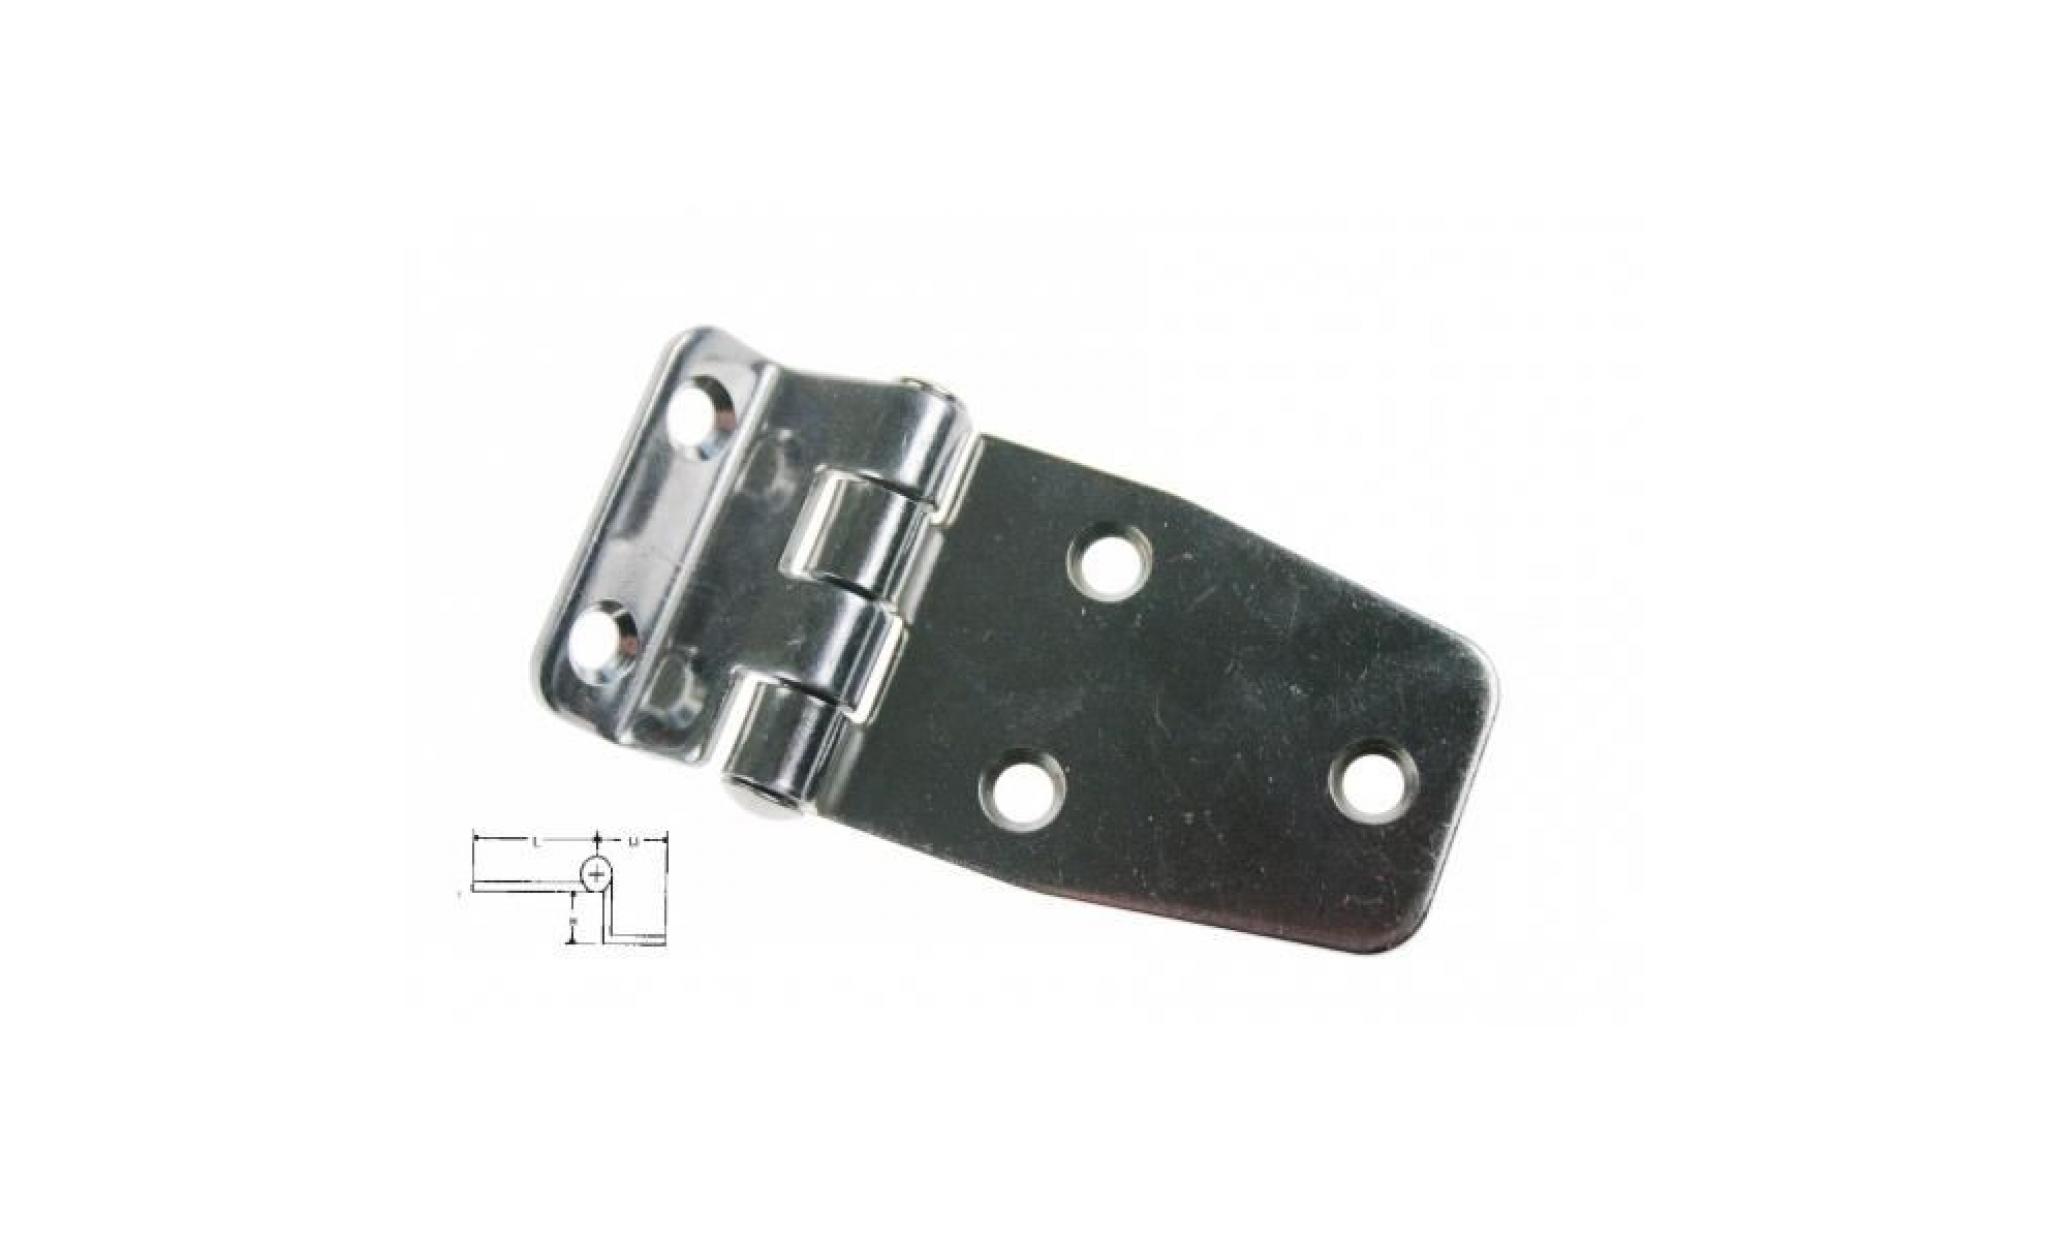 hinge stainless steel a2 76mm x 39mm337